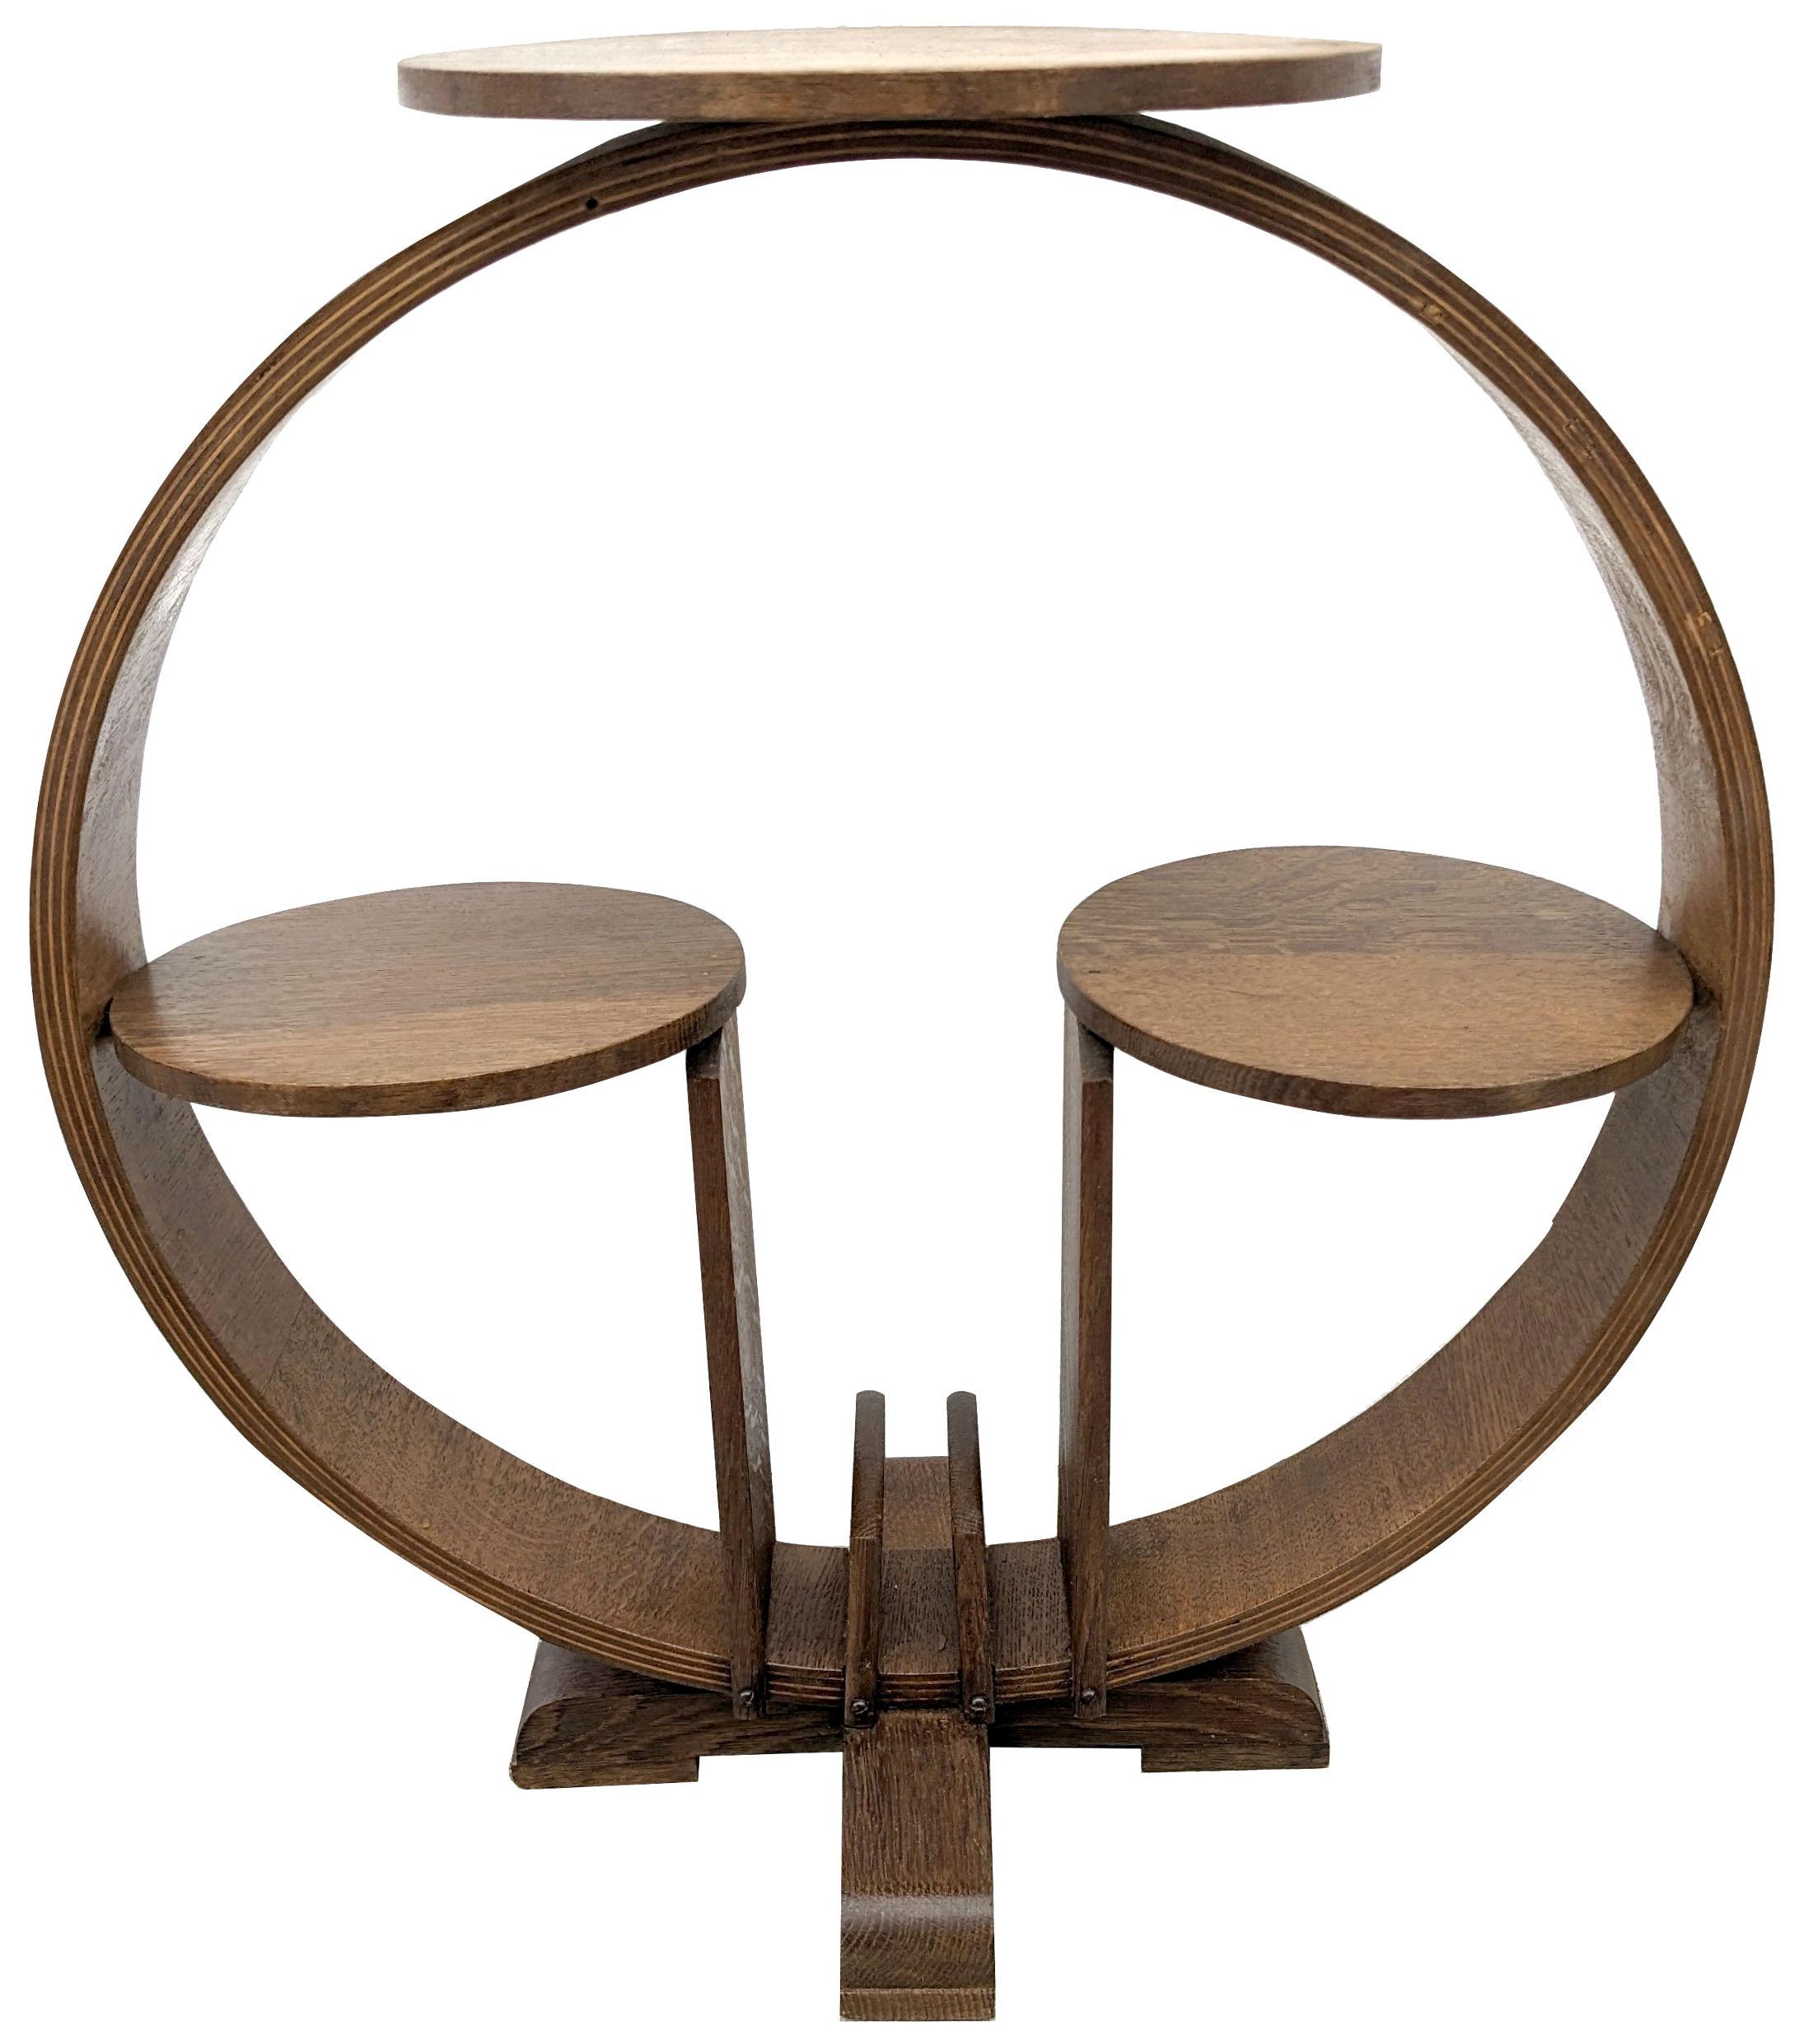 For your consideration is this superbly styled Art Deco stand, made from blonde oak and originates from England. Quite a good size standing 65 cm in height. Features three circles held within a large circular frame. To the base is an area to place